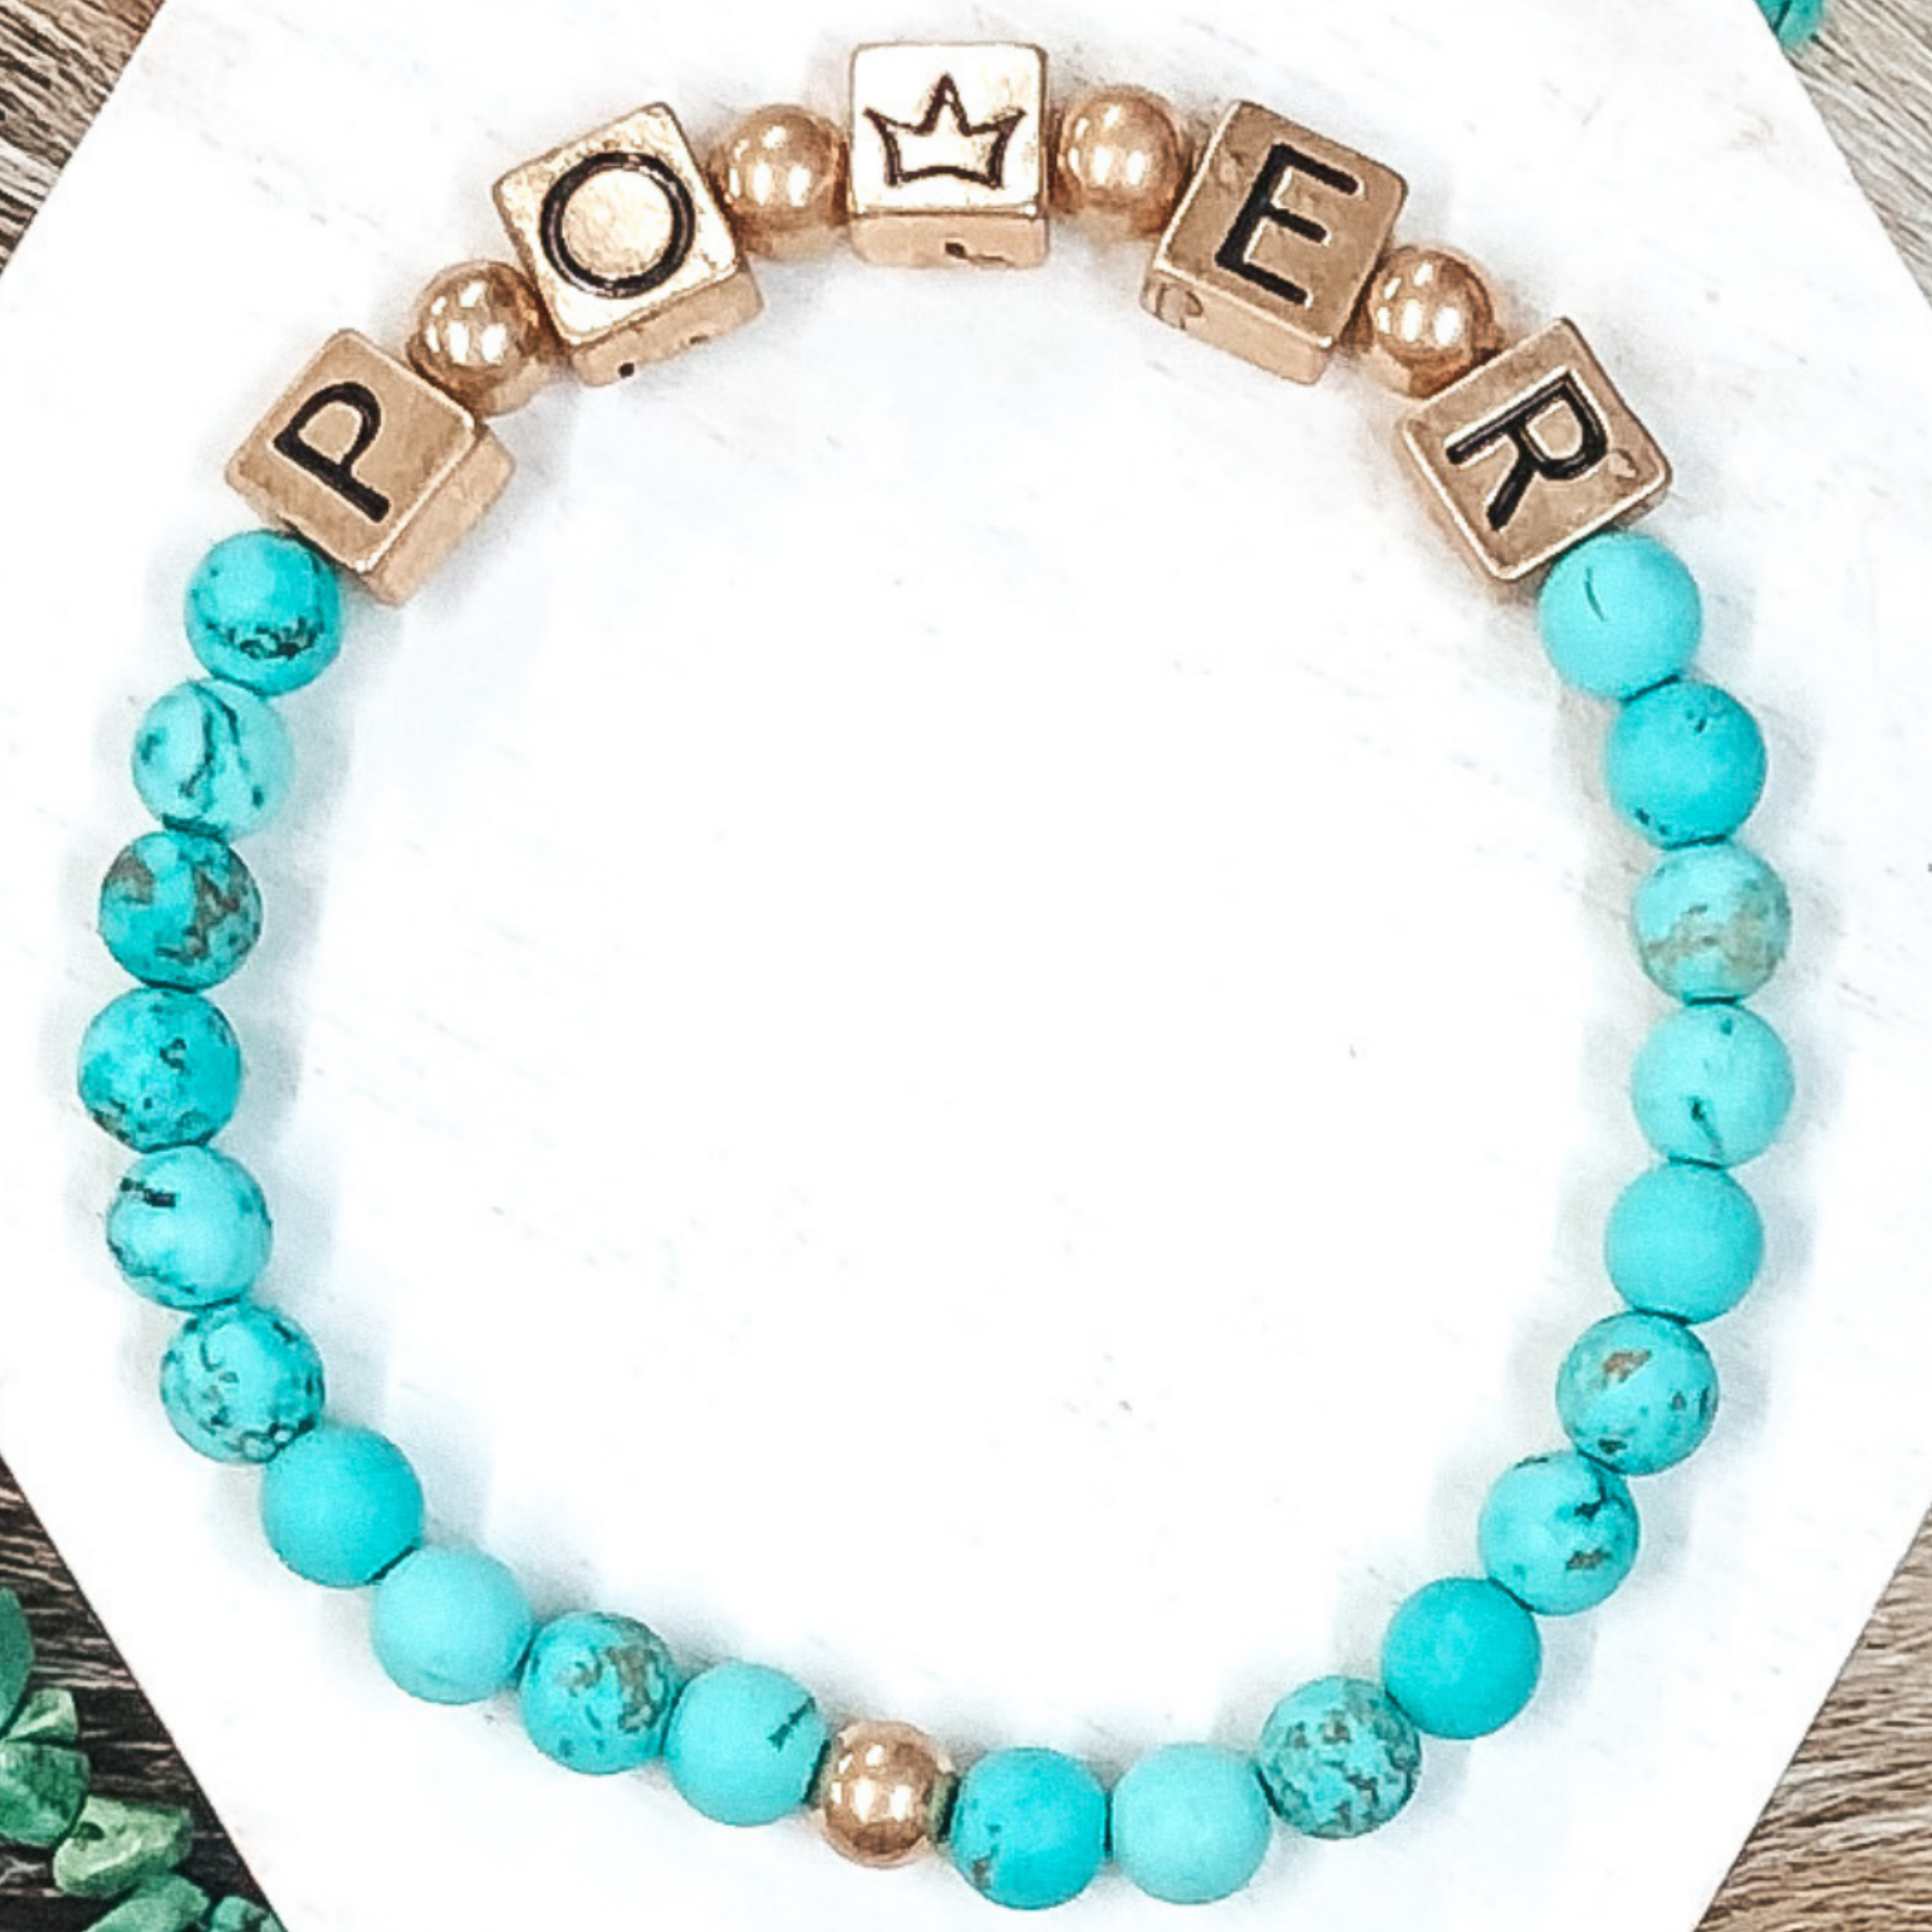 Power Up Bracelet in Turquoise - Giddy Up Glamour Boutique